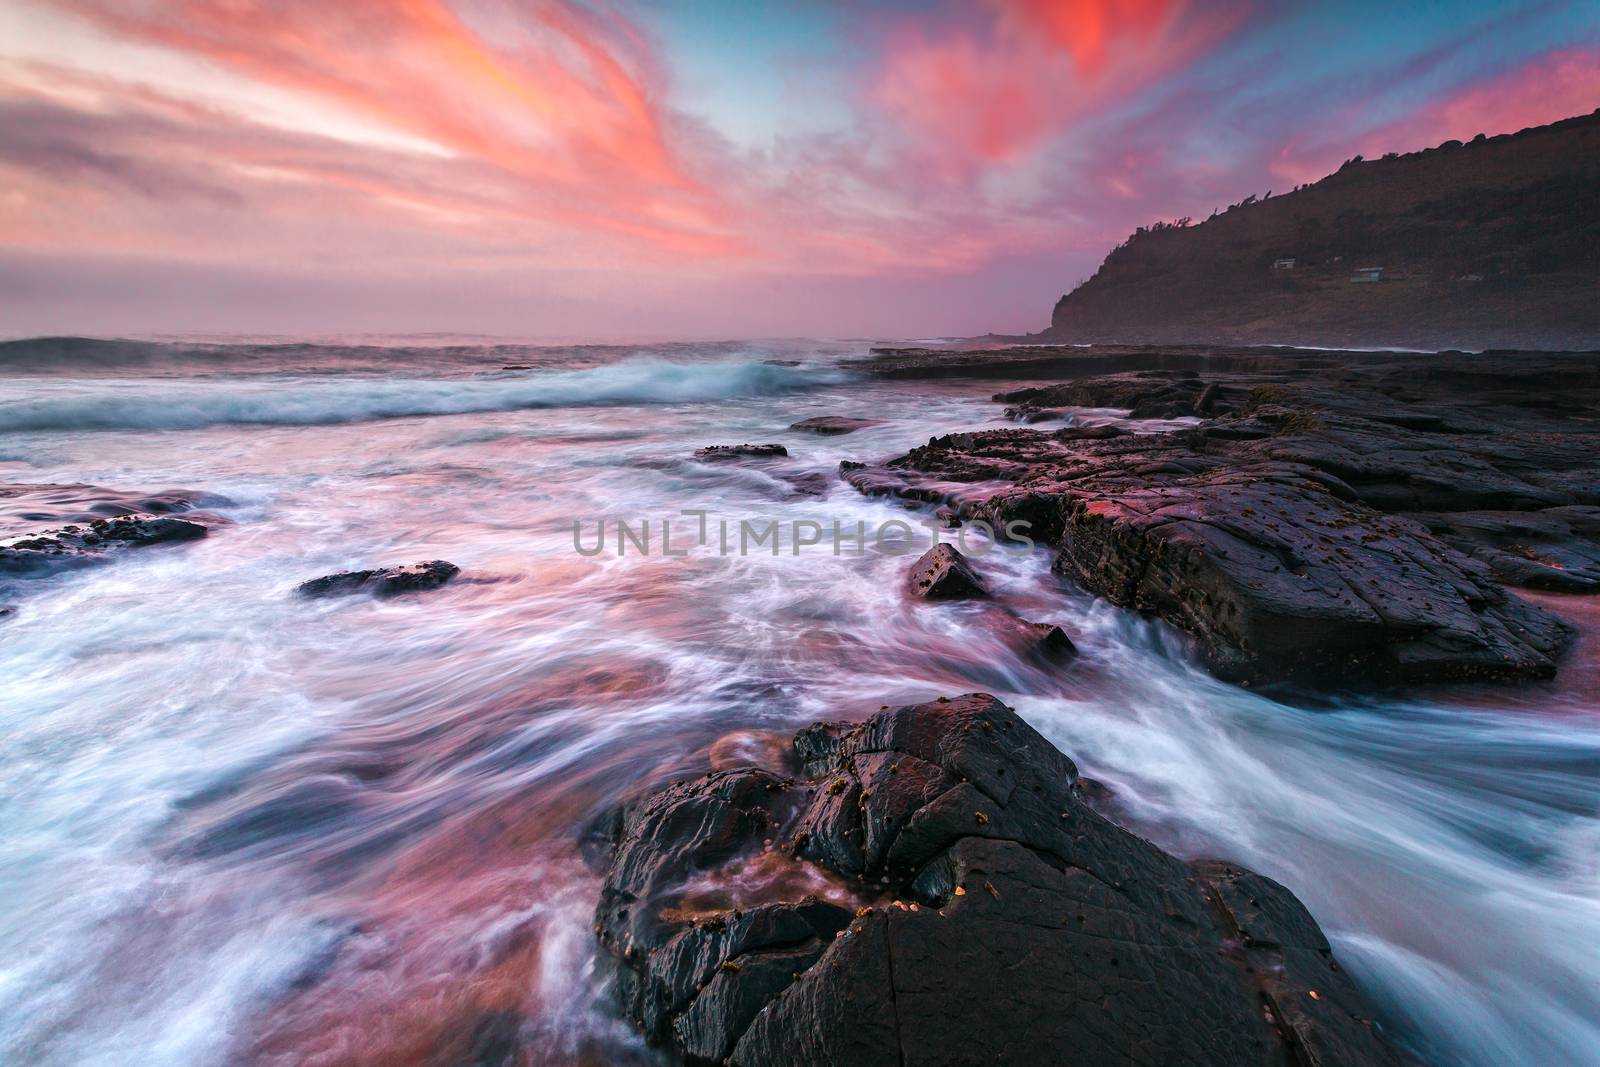 Collossal waves wash onto the coast while an impressive clouds dance in the sky changing shape and form dramatically, both clouds and water competing for attention drawing the viewer in with an epic display of magnificent colours and texture